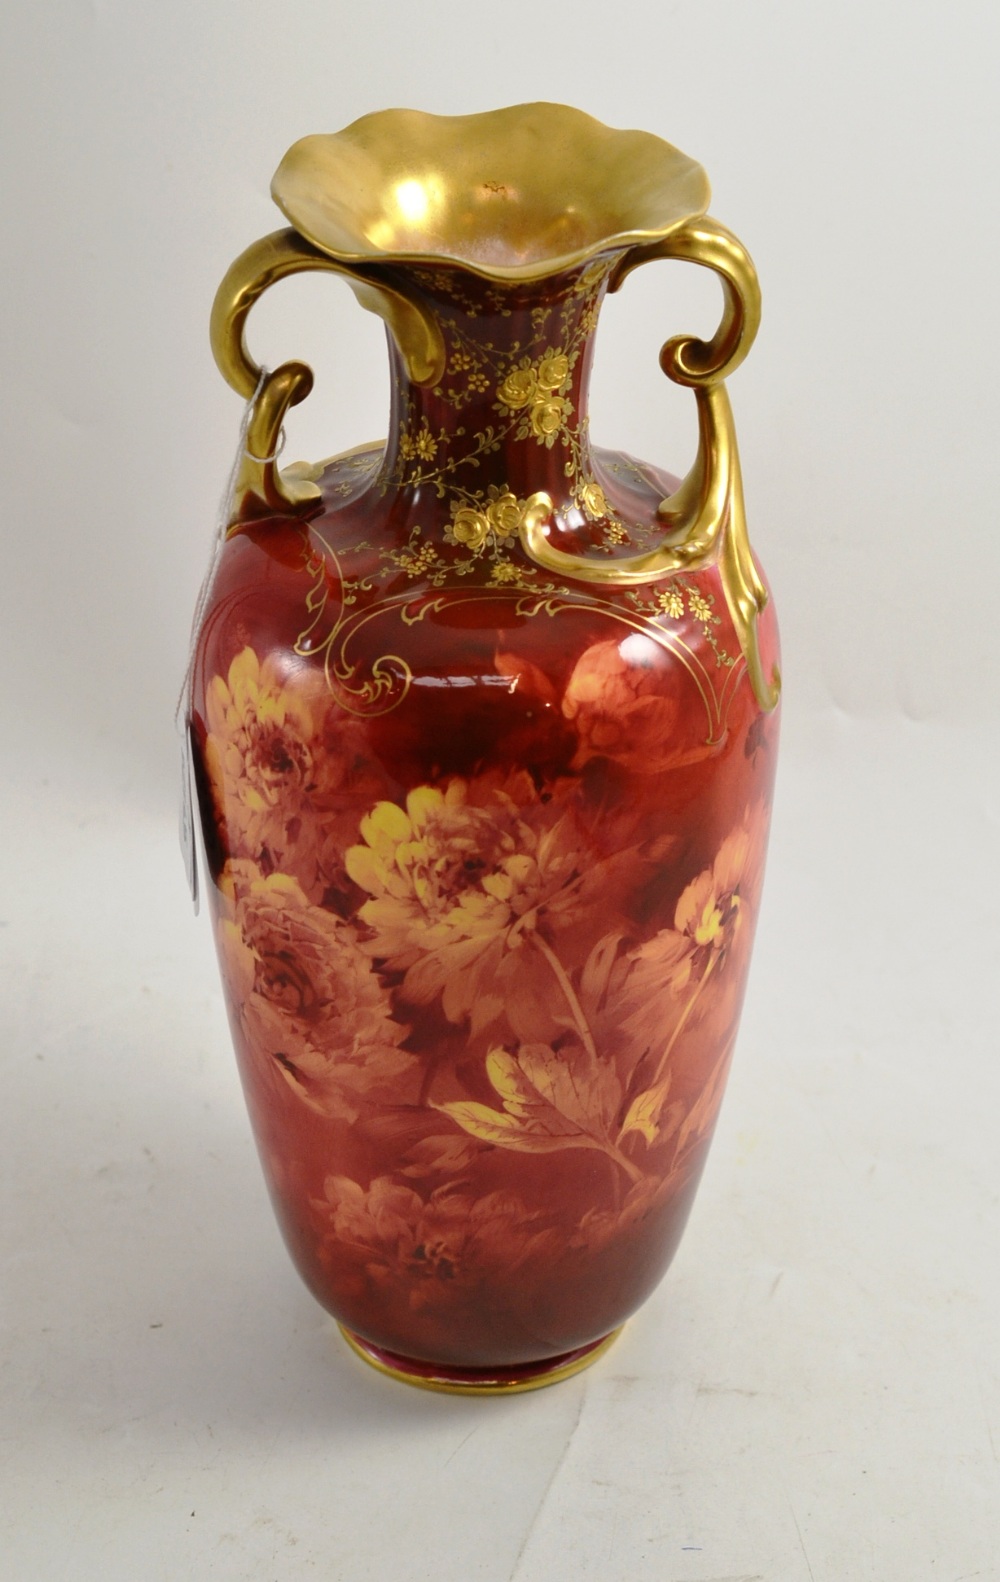 A Doulton Burslem twin handled vase with floral decoration on a red ground